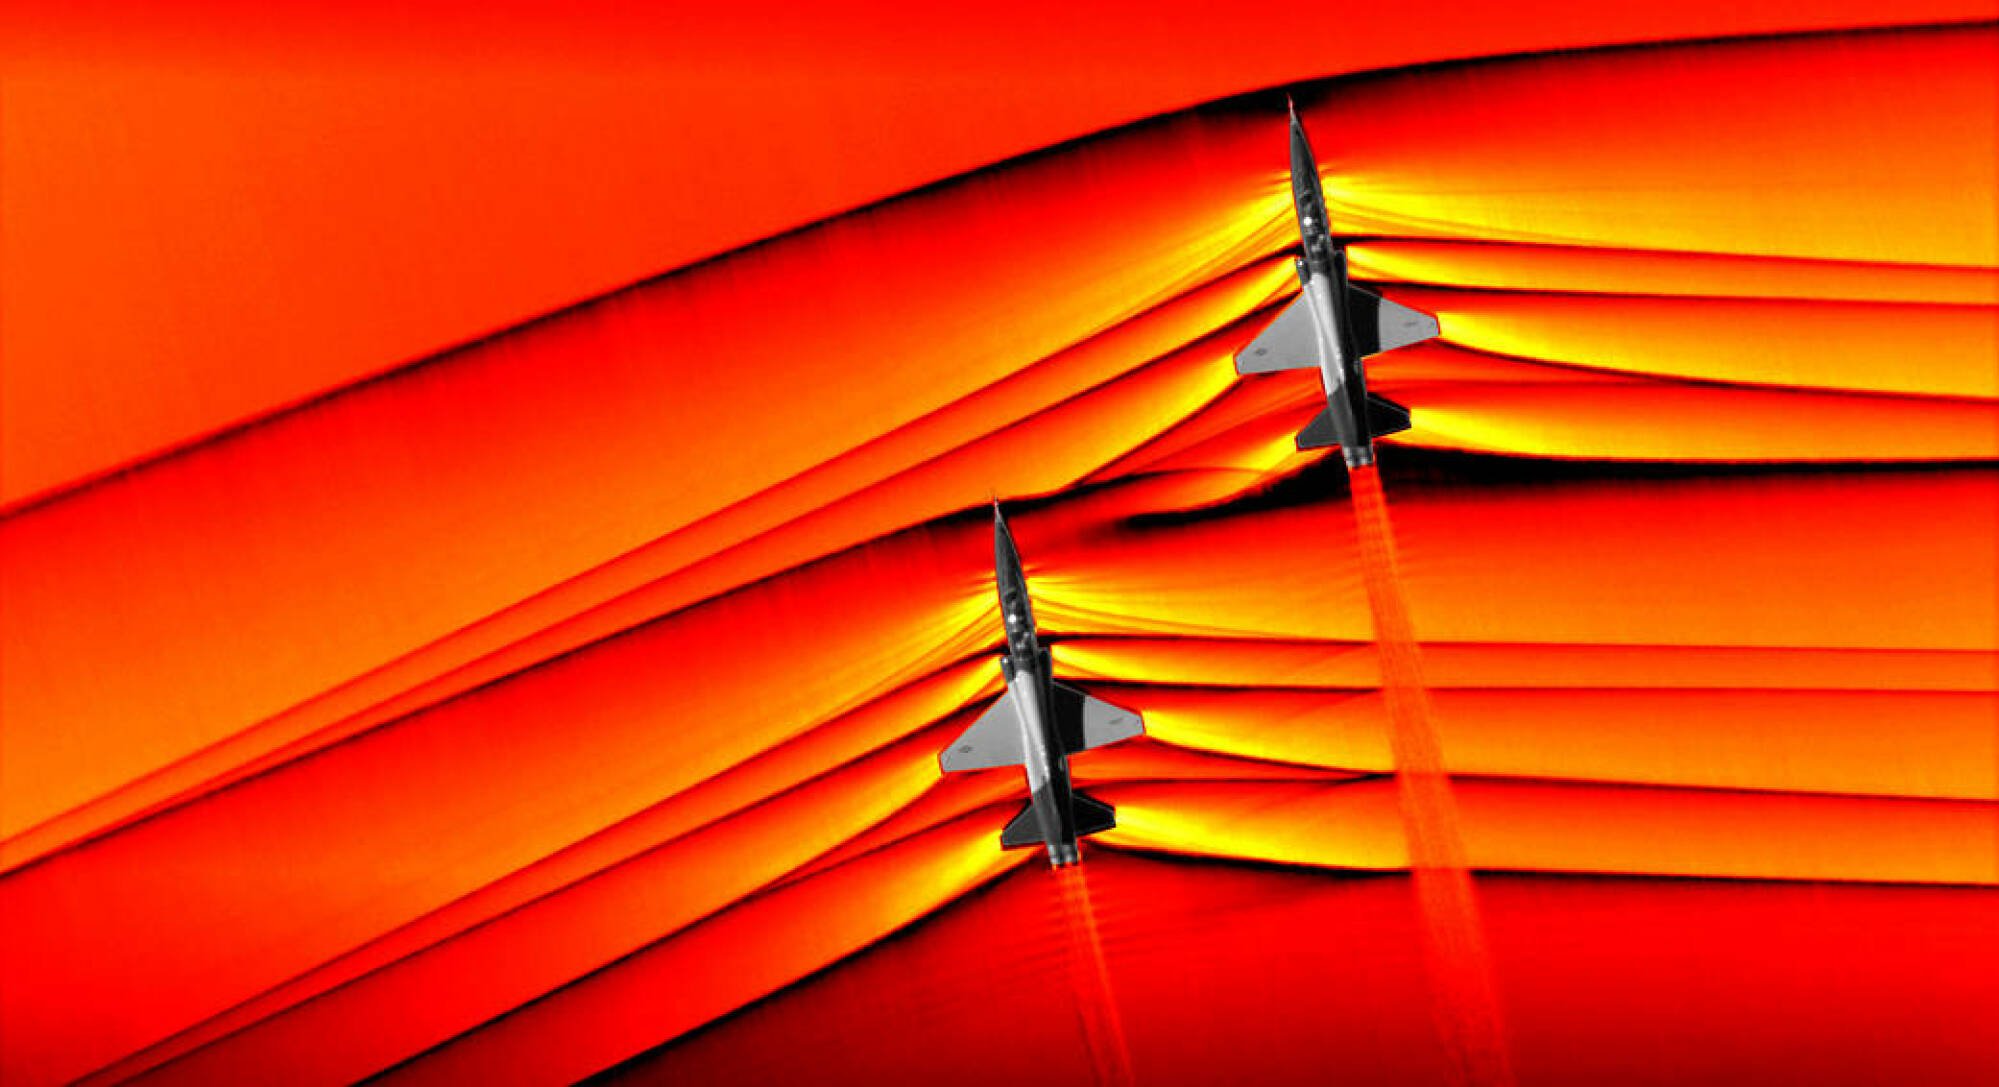 Two supersonic aircraft creating shockwaves as they travel through the atmosphere.